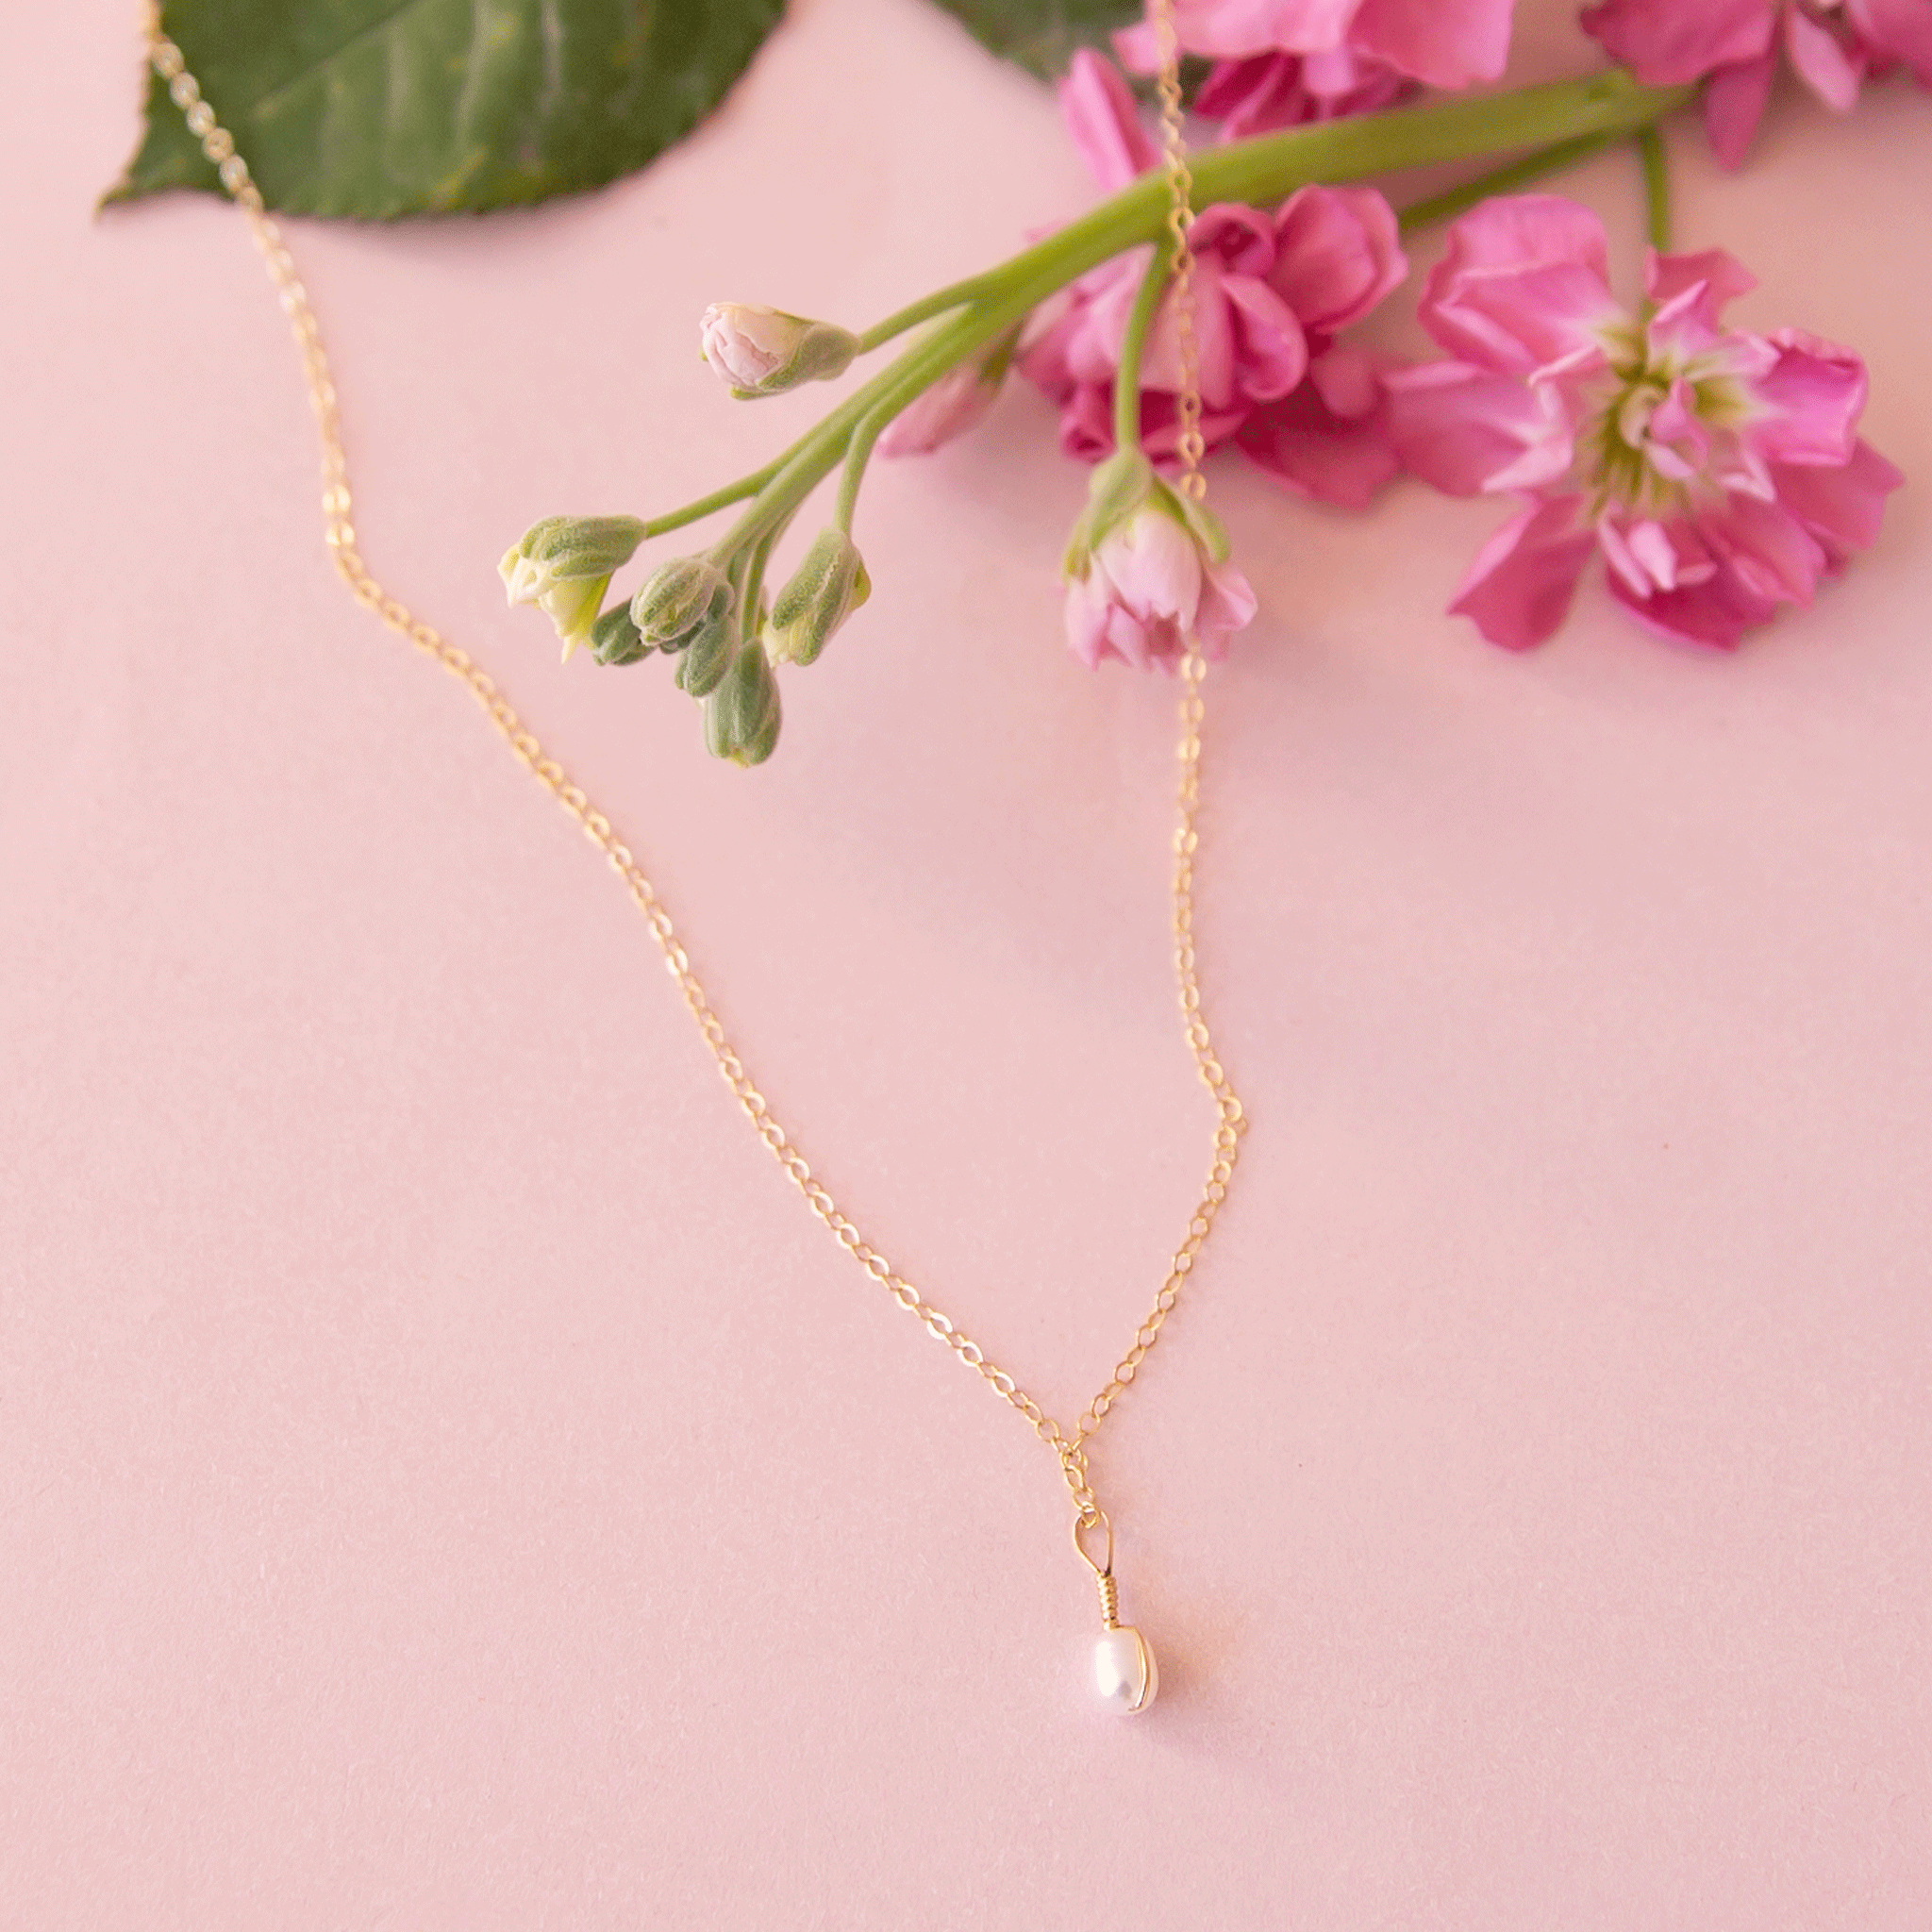 A gold filled necklace with a freshwater pearl pendant.